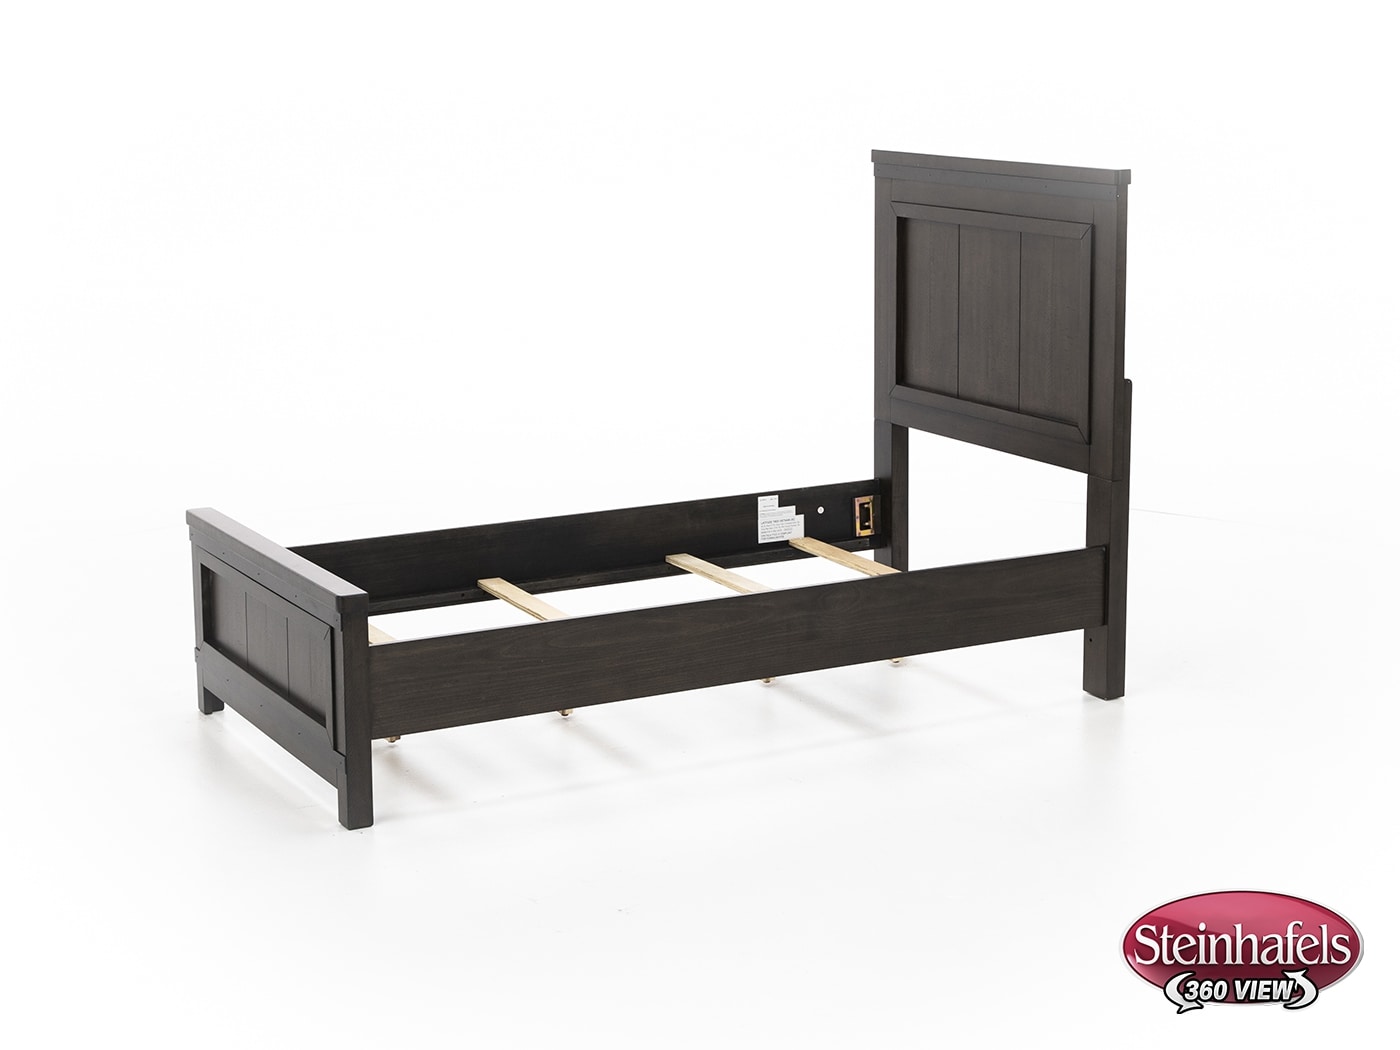 lbty brown twin bed package  image tp  